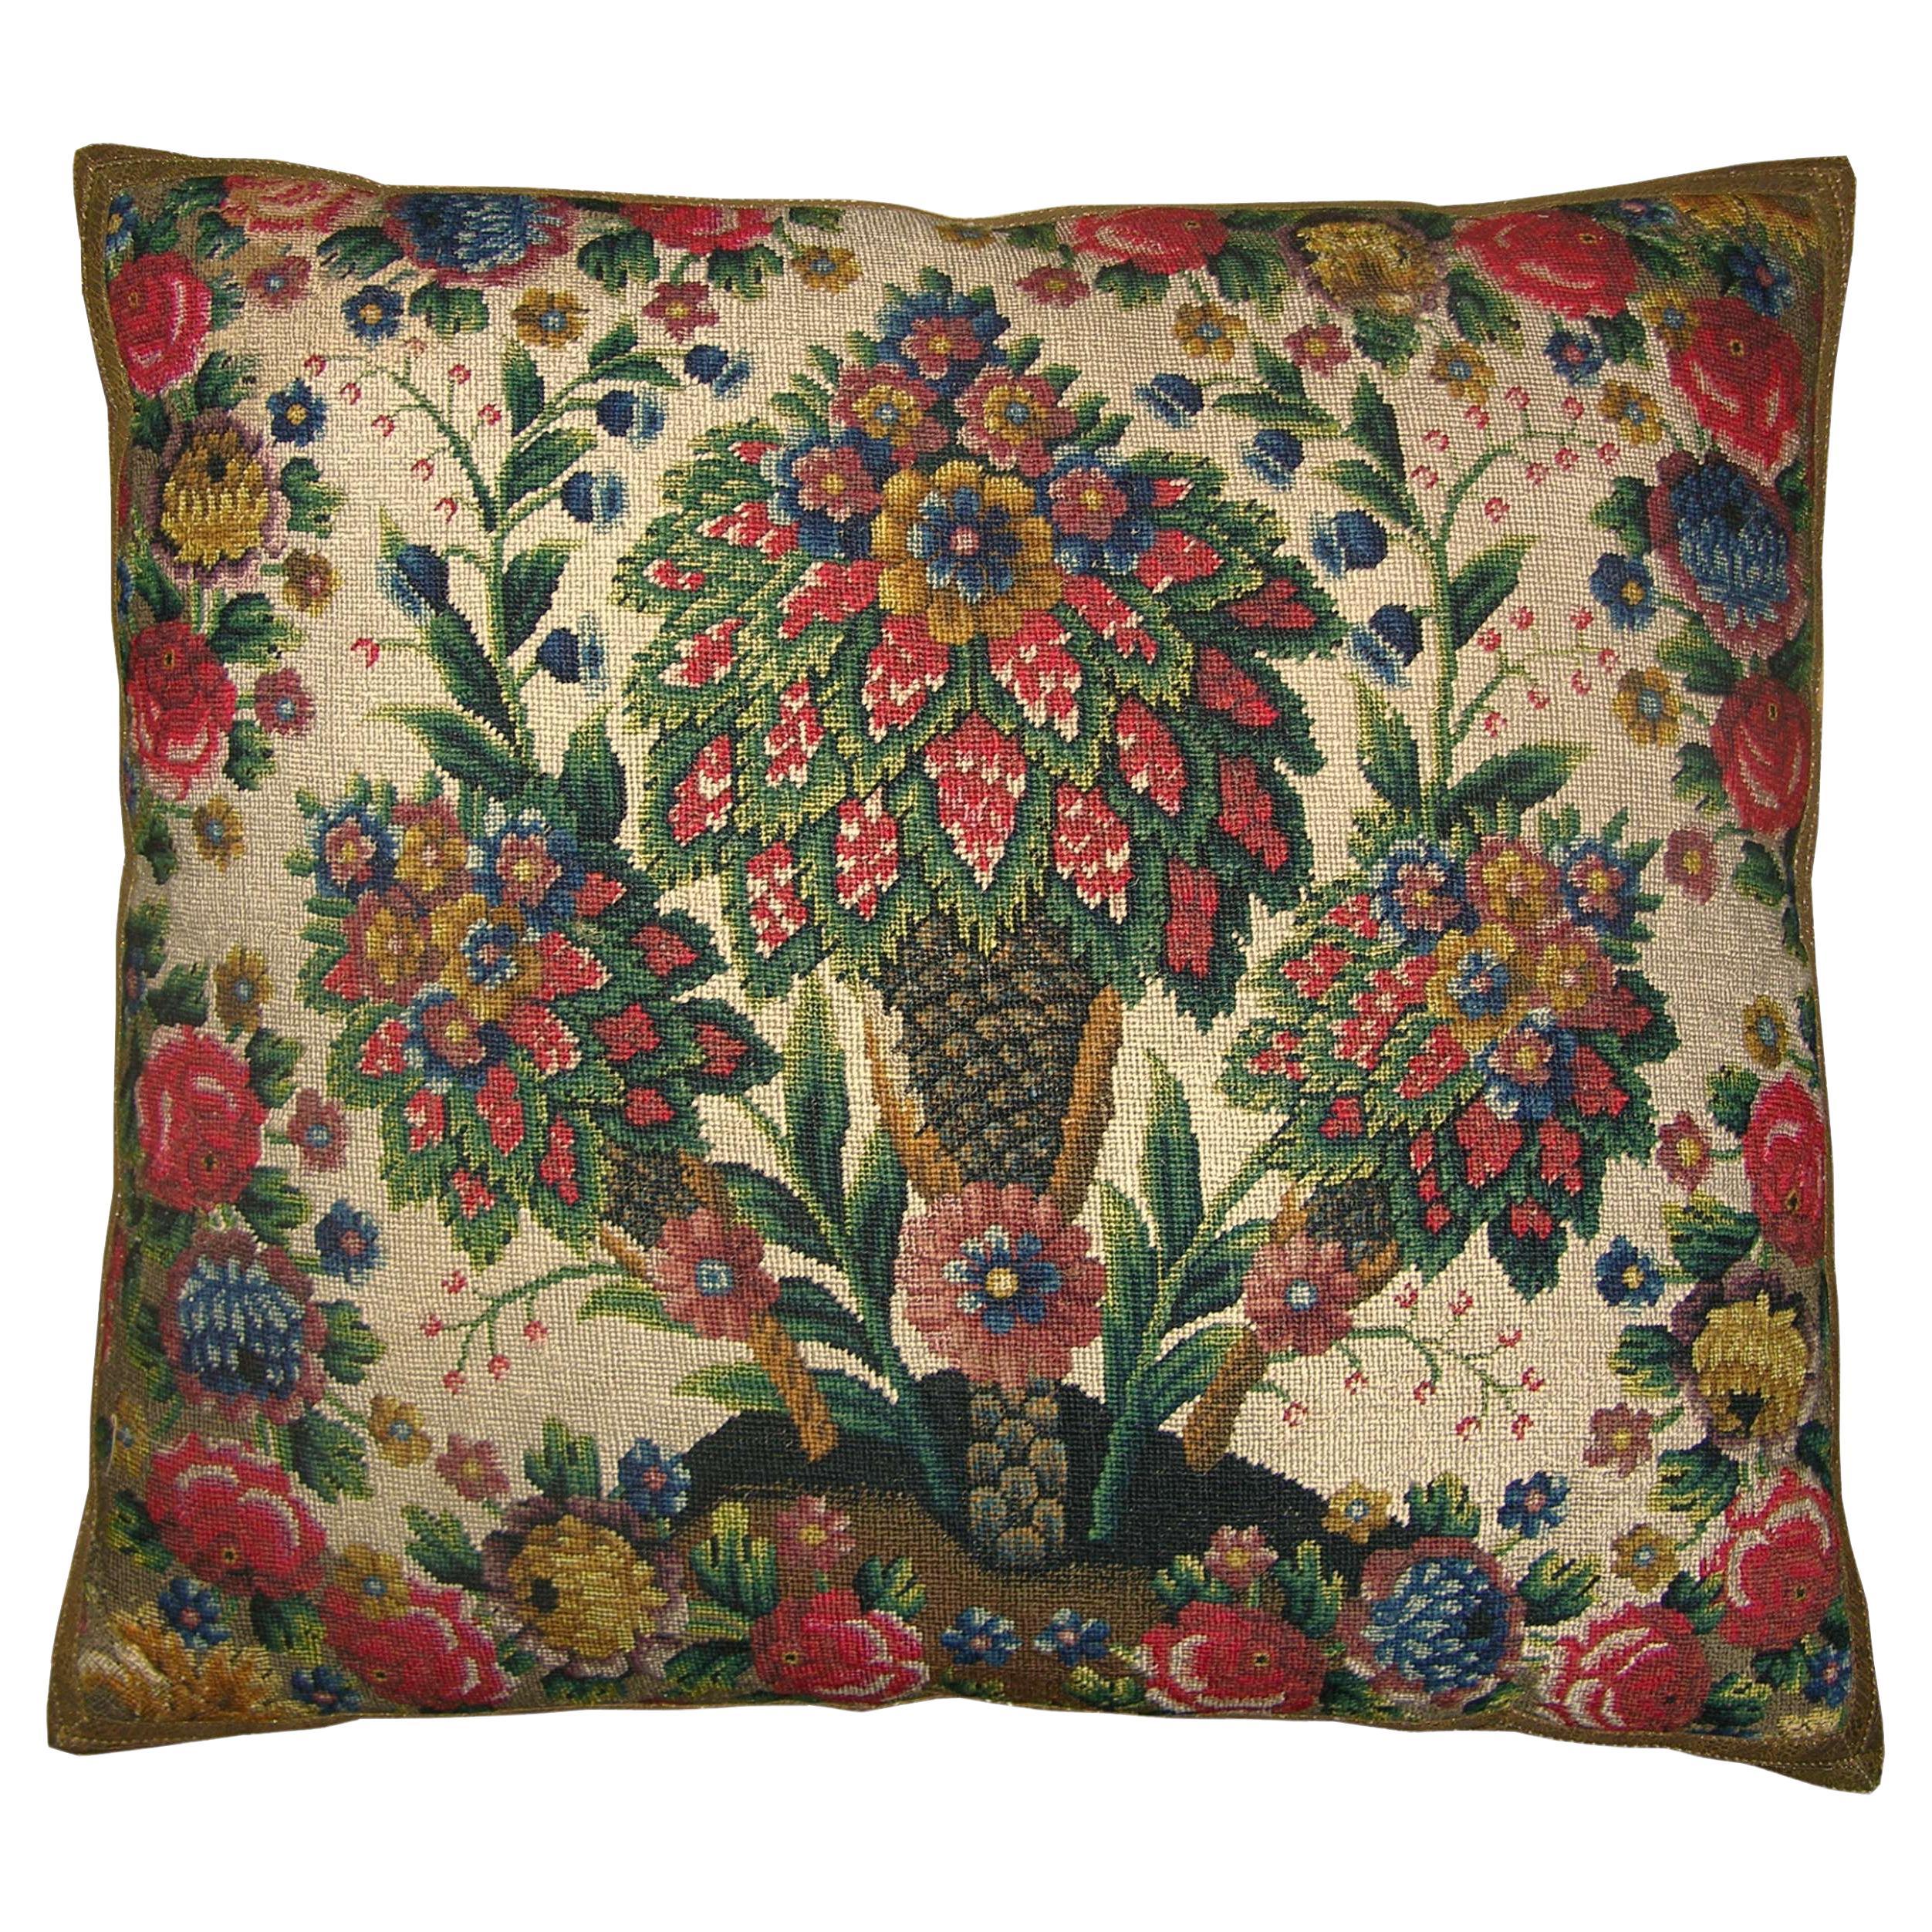 Circa 1850 Antique Needlepoint Tapestry Pillow For Sale